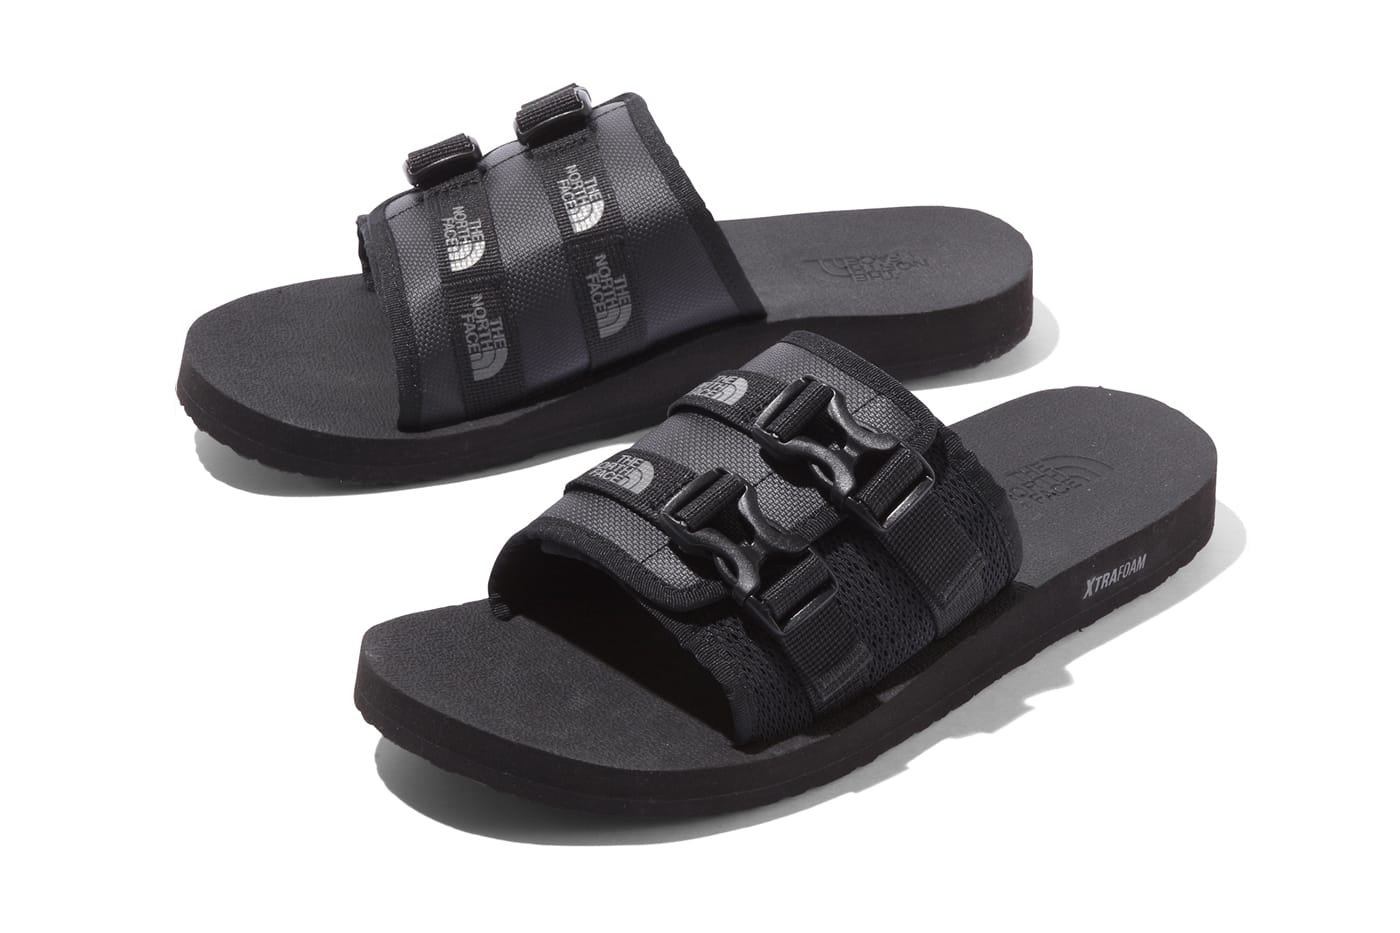 north face womens sliders